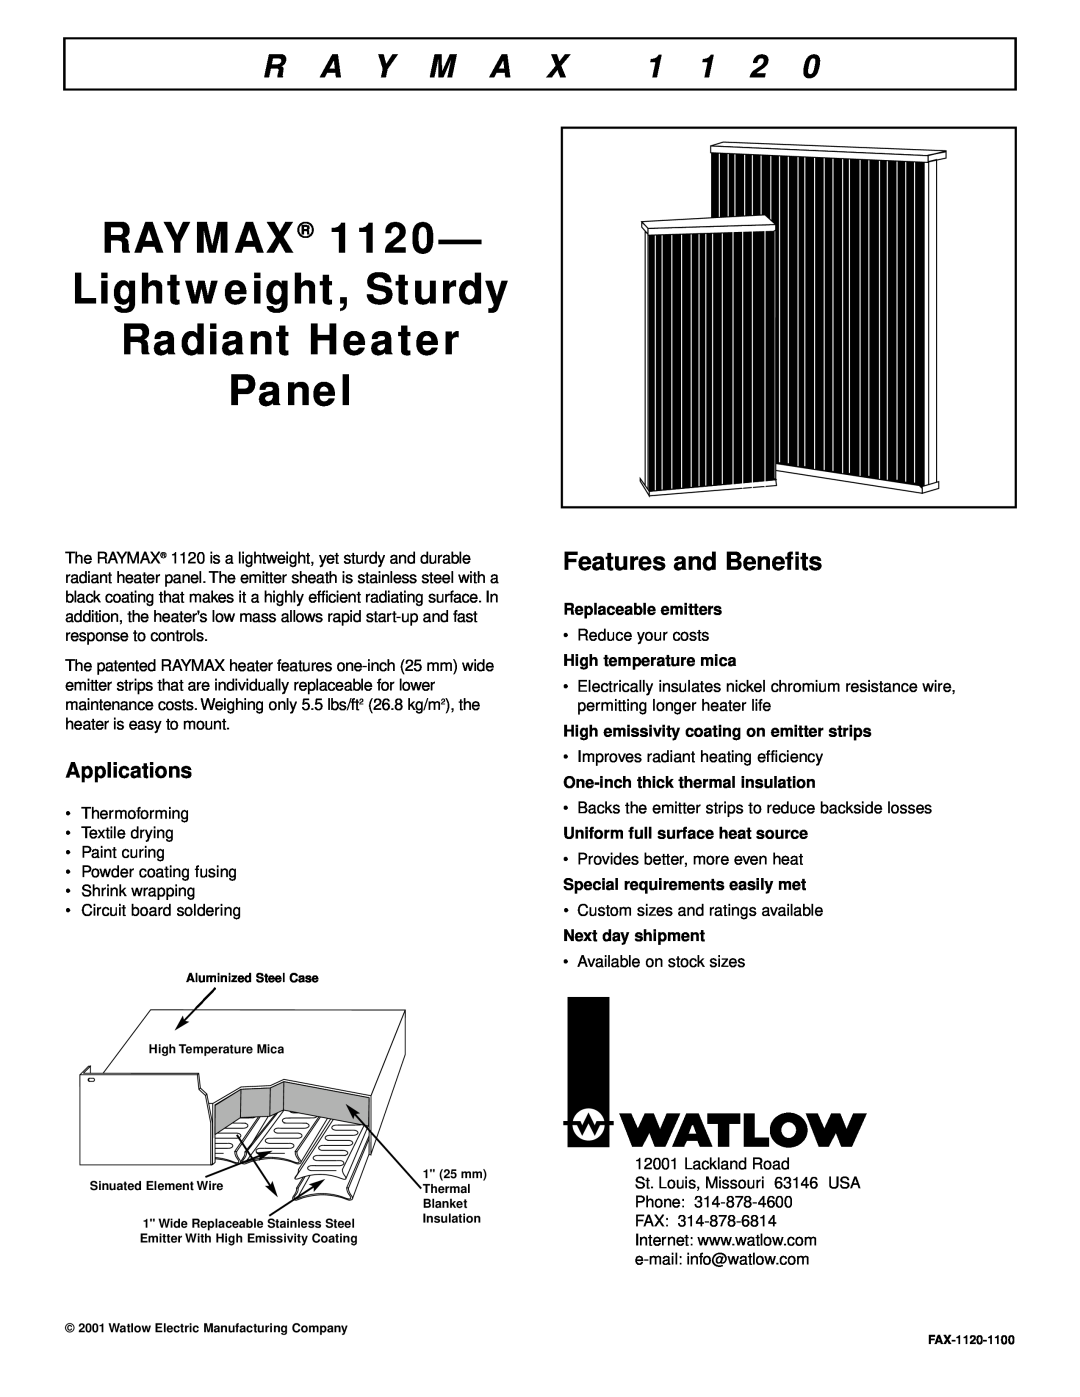 Watlow Electric 1120 manual R A Y M A, Features and Benefits, Applications, Replaceable emitters, High temperature mica 